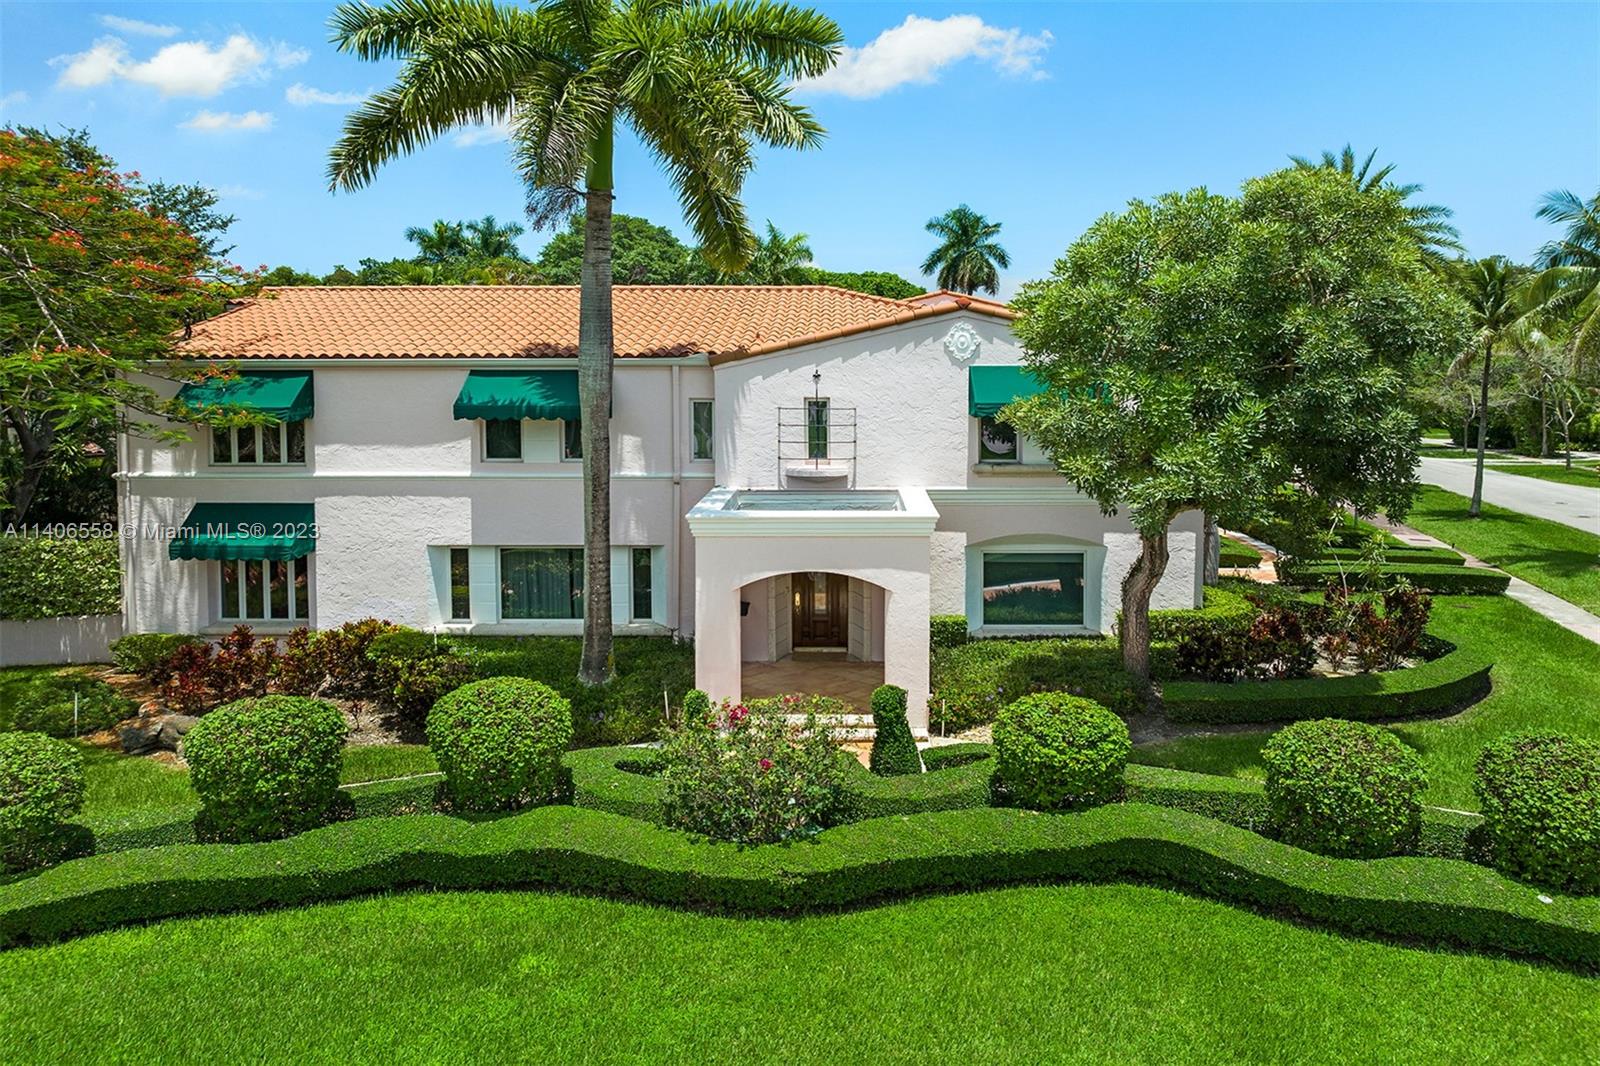 Exquisite and impressive 12,327 SF luxury estate with 7 bedrooms, 8  bathrooms and 2 half-bathrooms, on a 31,529 SF lot in Coral Gables. A grand foyer leads to an open layout with sizable rooms and custom architectural details, two formal dining rooms, and a gourmet kitchen with floor-to-ceiling cabinetry,  large center island, pantry, and top-of-the-line appliances. Includes a spacious primary bedroom suite, well-appointed office/library, game room, and elevator. Beautiful arched French windows/doors open to stunning outdoor areas with tall palm trees, manicured grounds, and a large pool with a brand new heater. Ample parking with a 3-car garage and driveway; new roof and AC units in 2019. Within close proximity to fine dining, high-end shopping and entertainment venues.